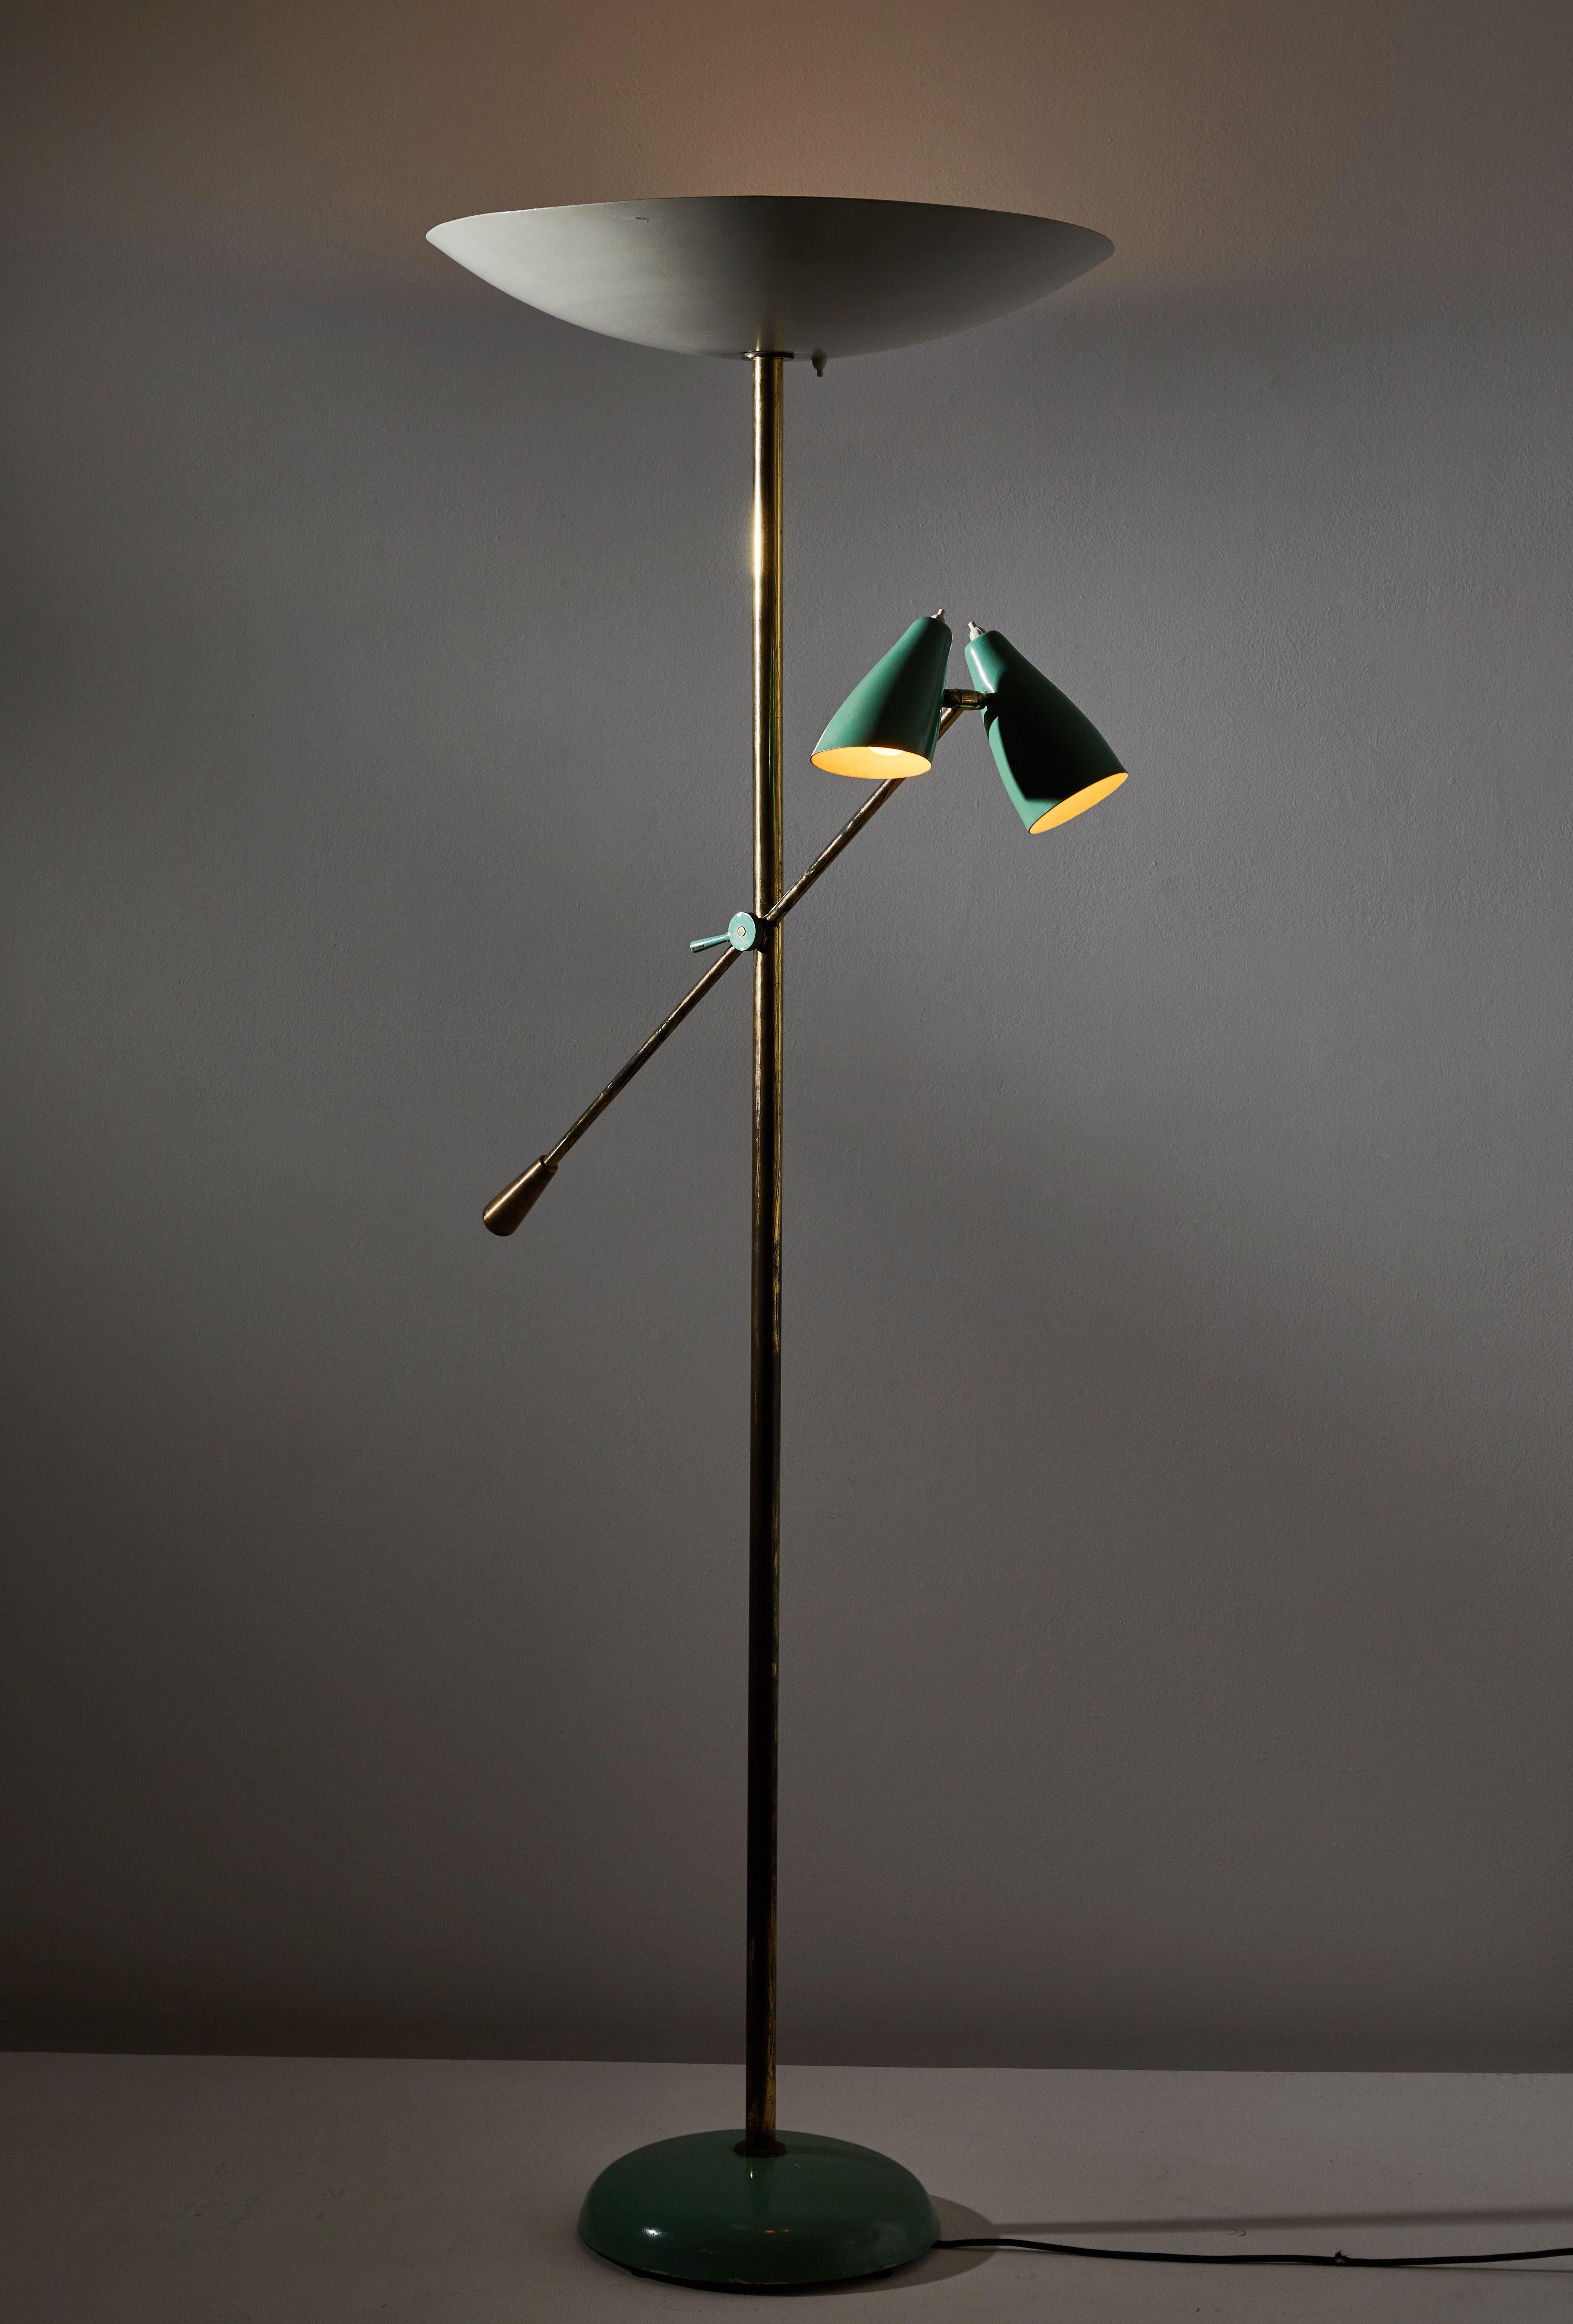 Rare floor lamp by Stilnovo. Manufactured in Italy, circa 1940s. All original enameled metal and patinated brass. Arm and shades adjust to various positions. Rewired with brown cloth cord. Five sockets E27 25w maximum bulbs and three E27 60w maximum